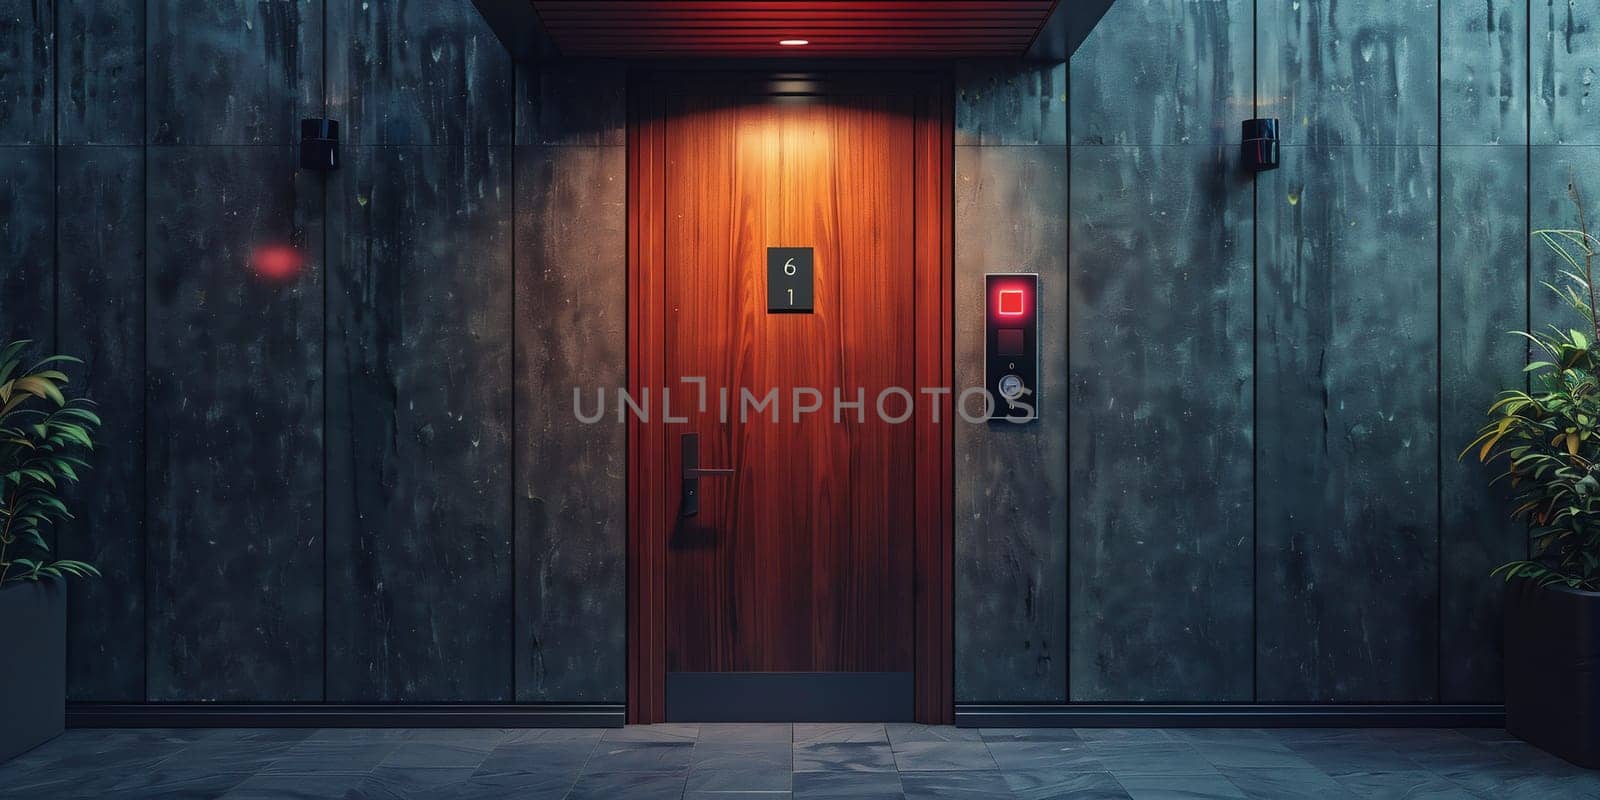 Massive wooden entrance door to modern white house with paving footpath in the city. New, modern architecture, exterior design. High quality photo